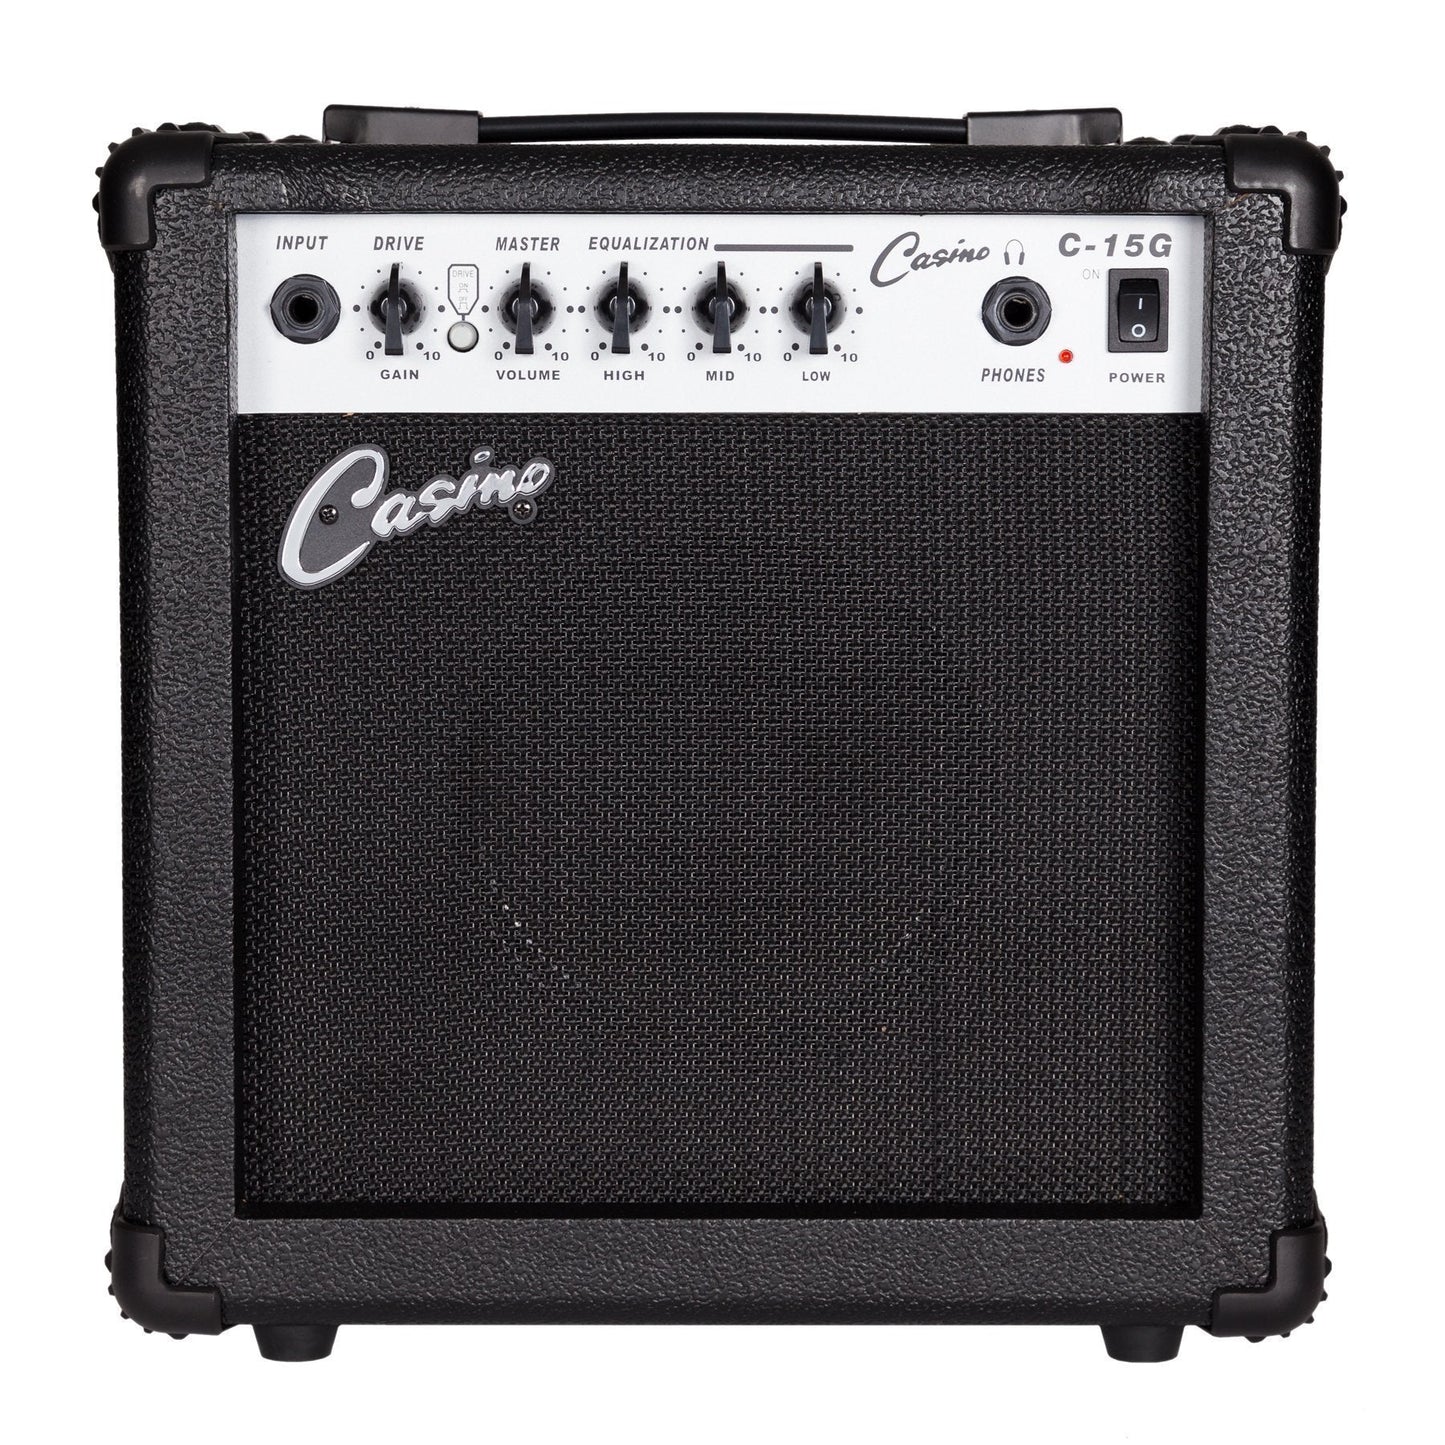 Casino ST-Style Electric Guitar and 15 Watt Amplifier Pack (Transparent Wine Red)